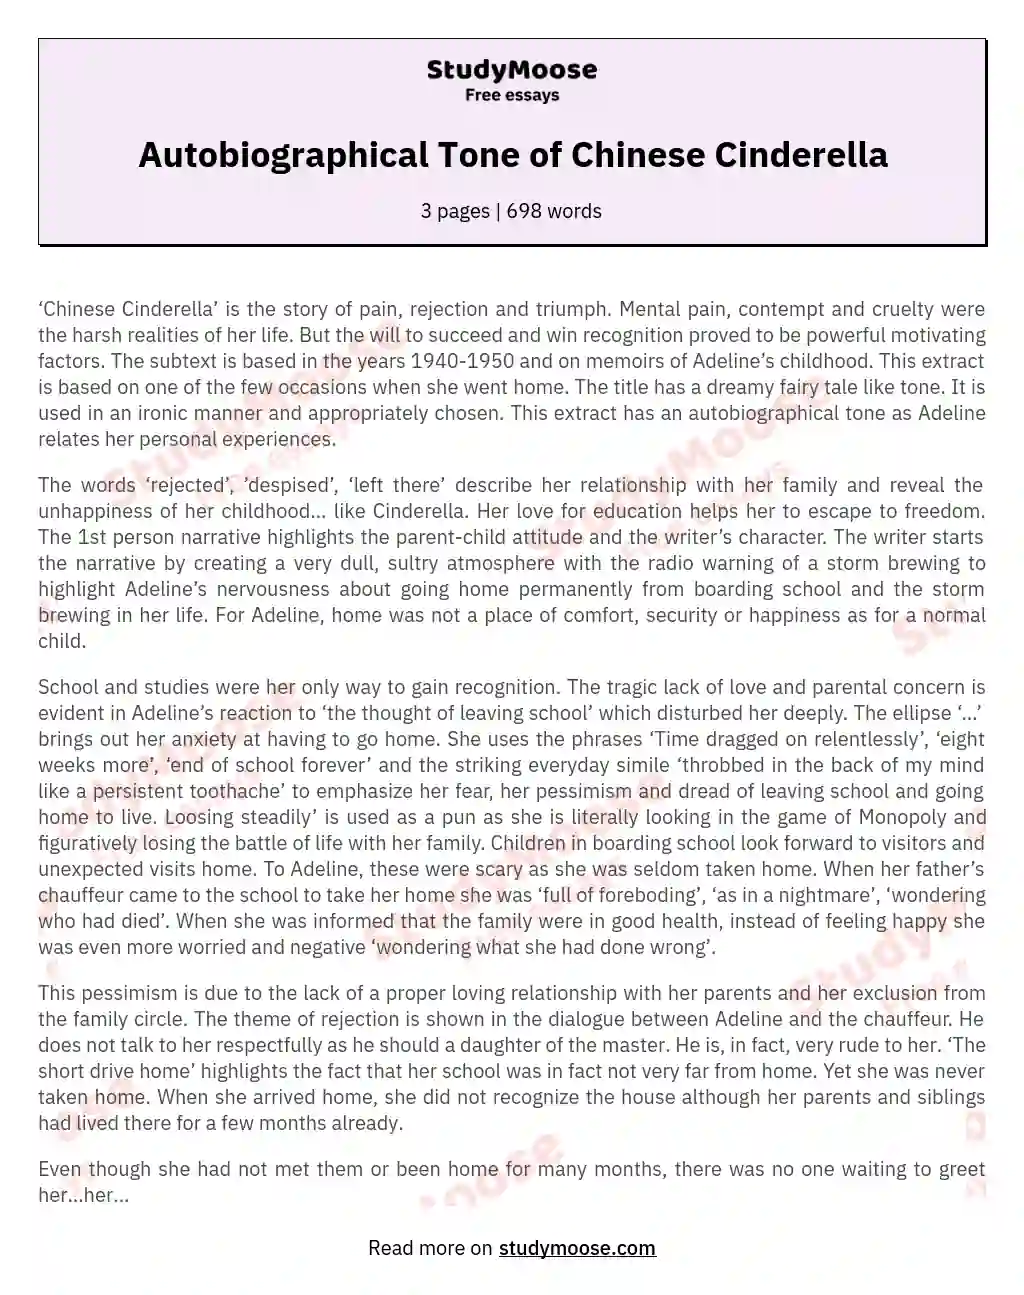 Autobiographical Tone of Chinese Cinderella